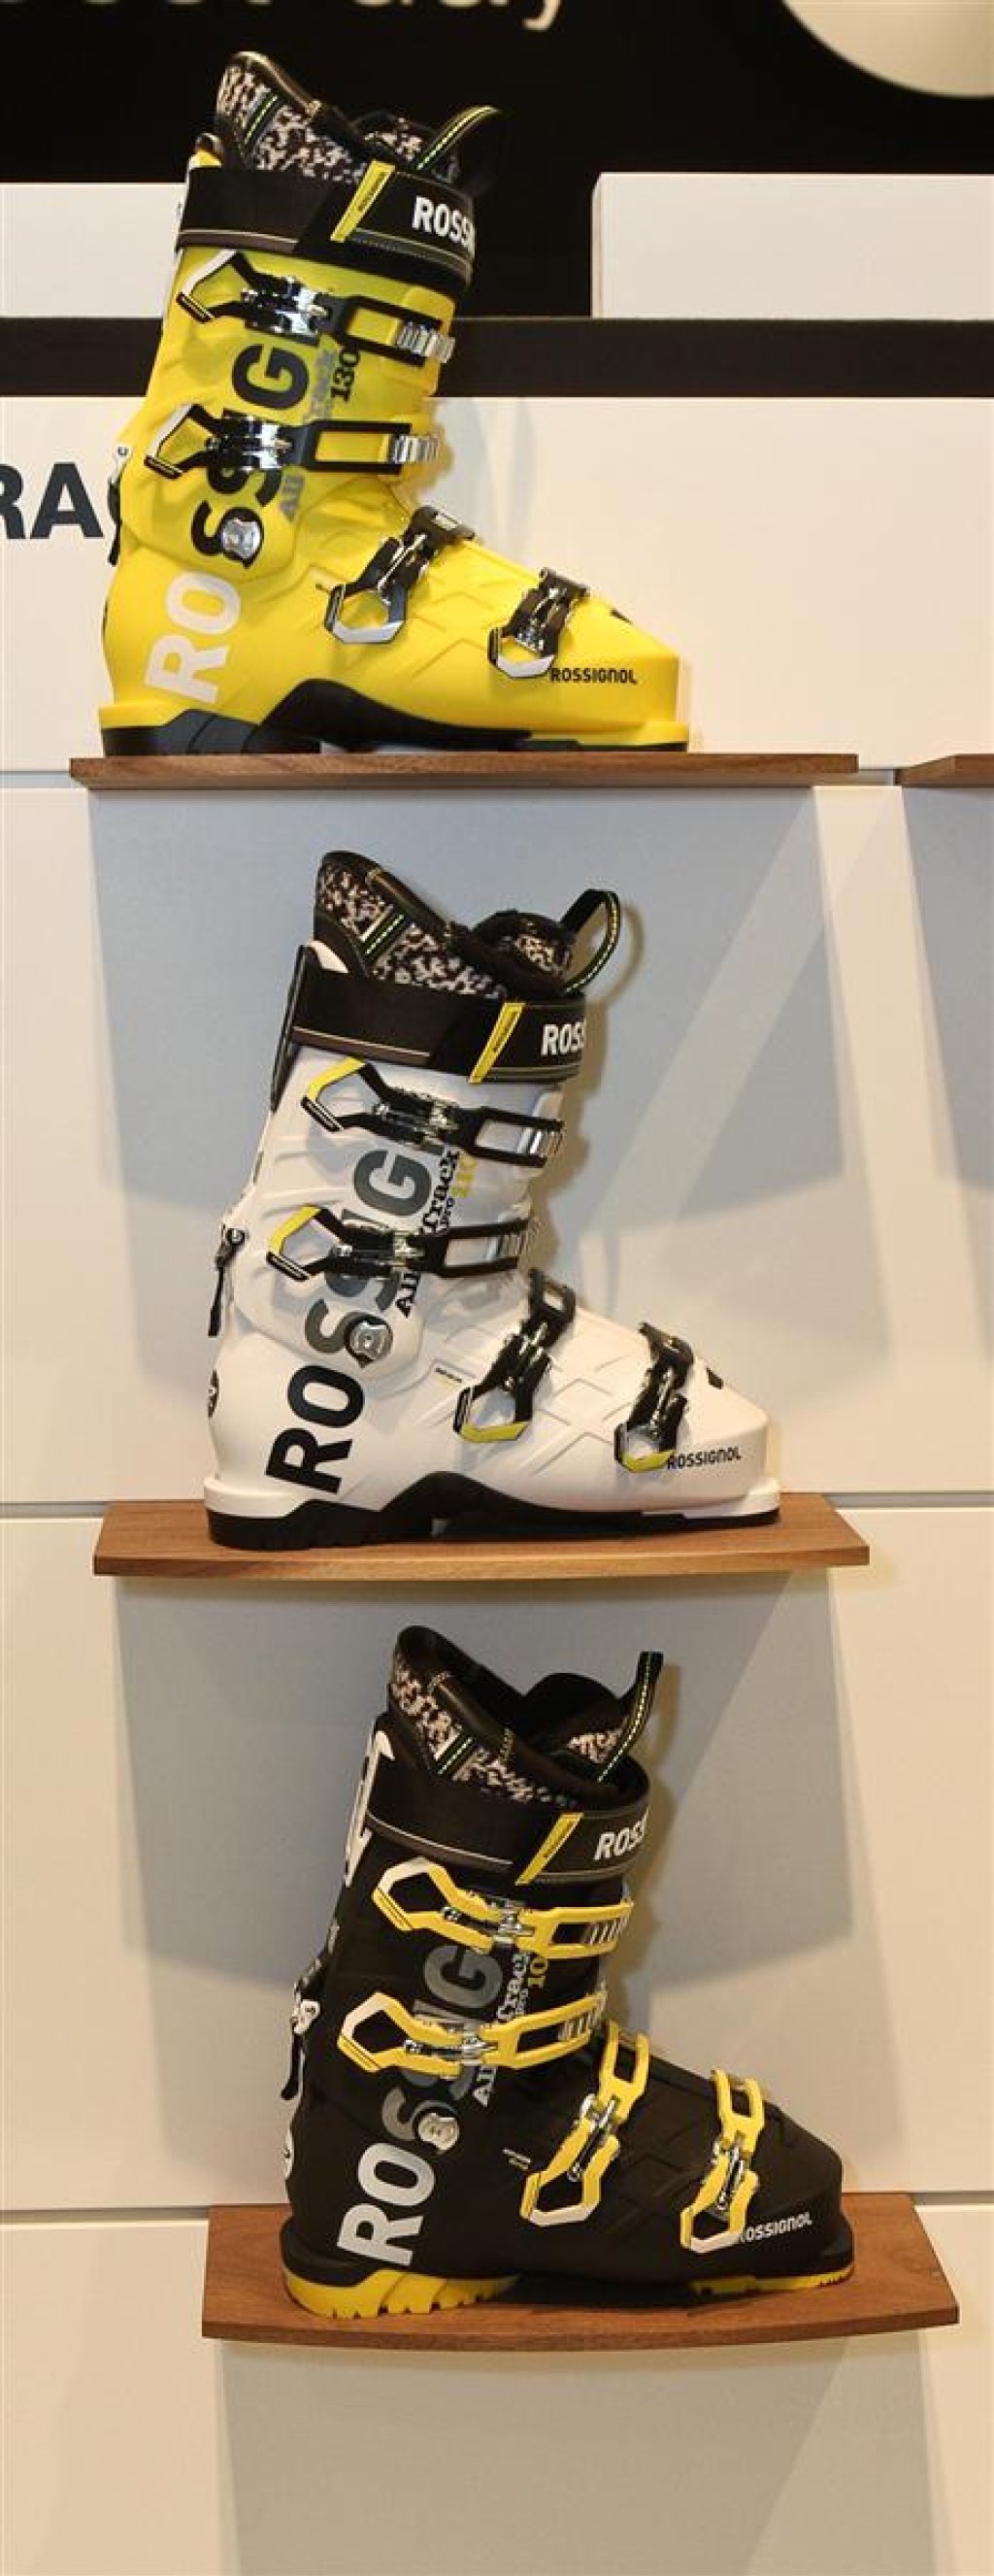 The other boots in the Rossignol Alltrack series: Alltrack Pro 130, 110 and 100